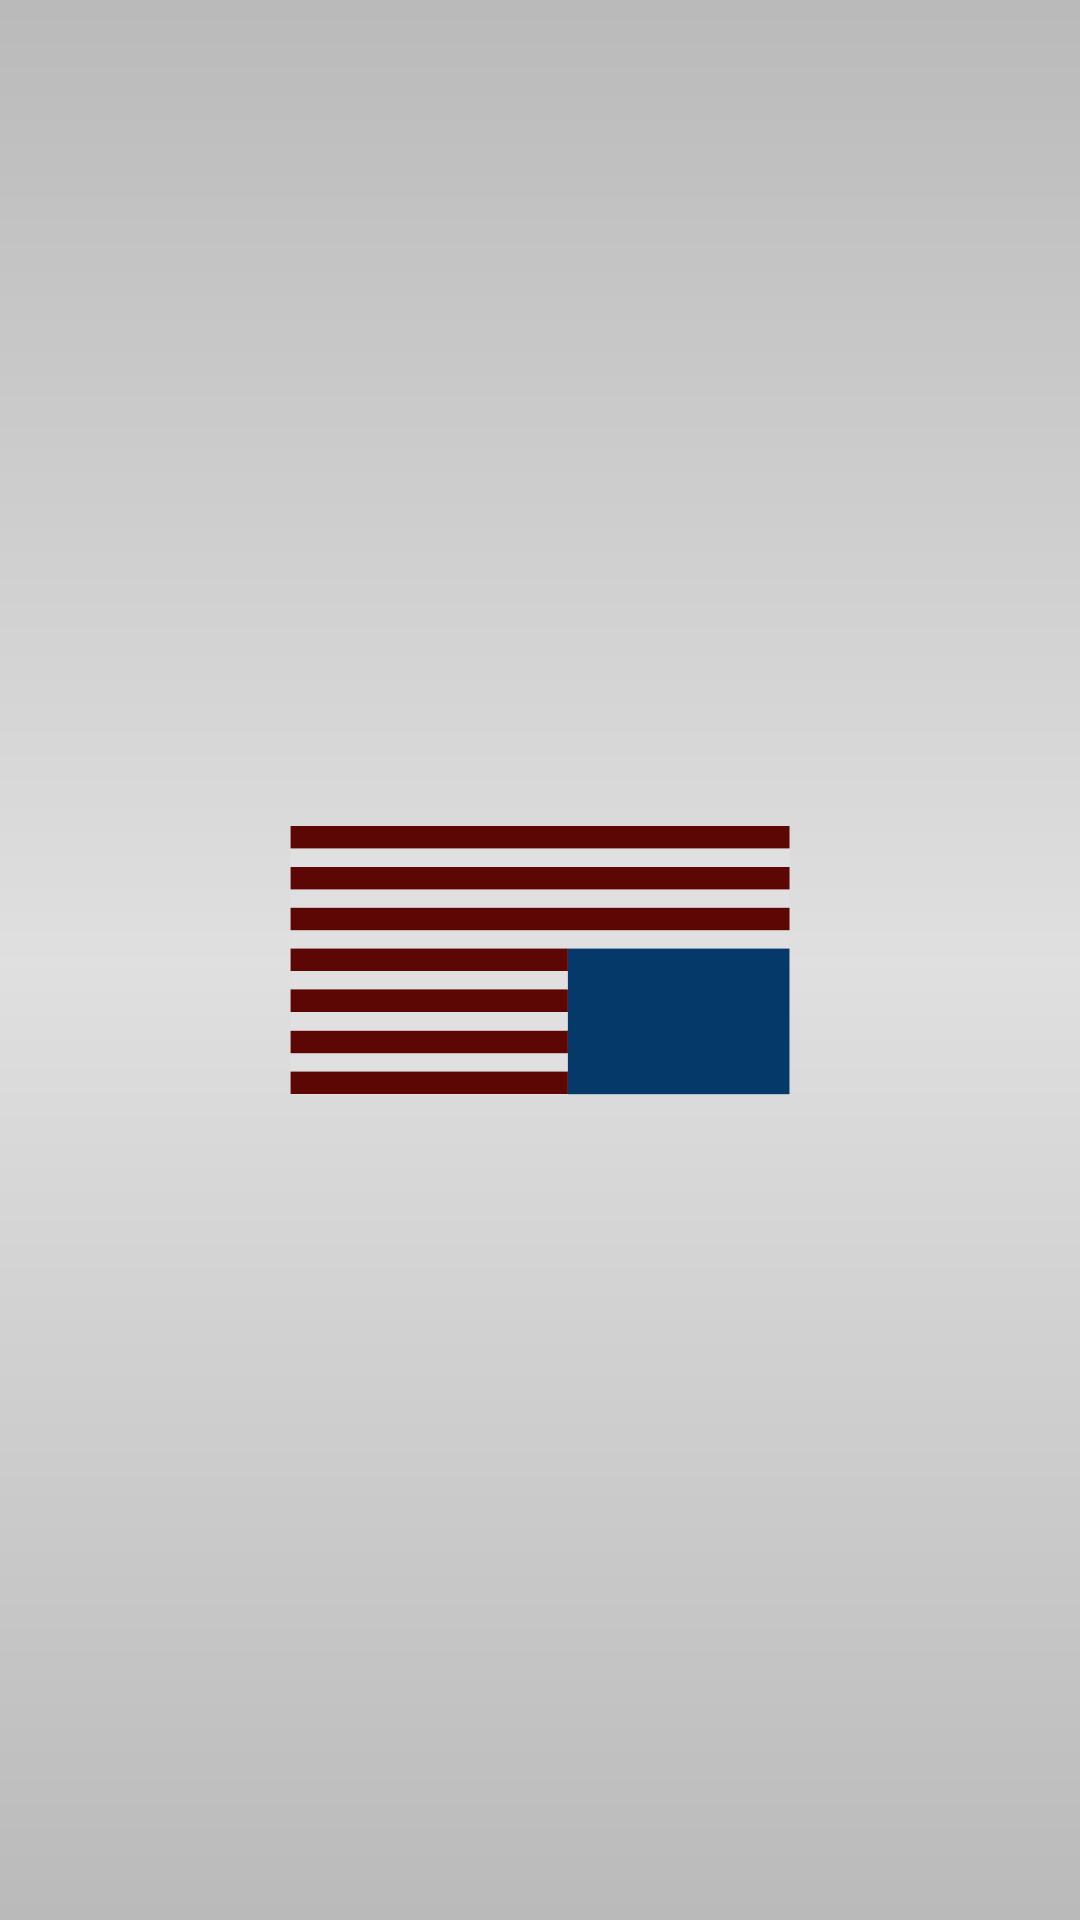 1080x1920 Free Download American Flag Iphone Backgrounds .